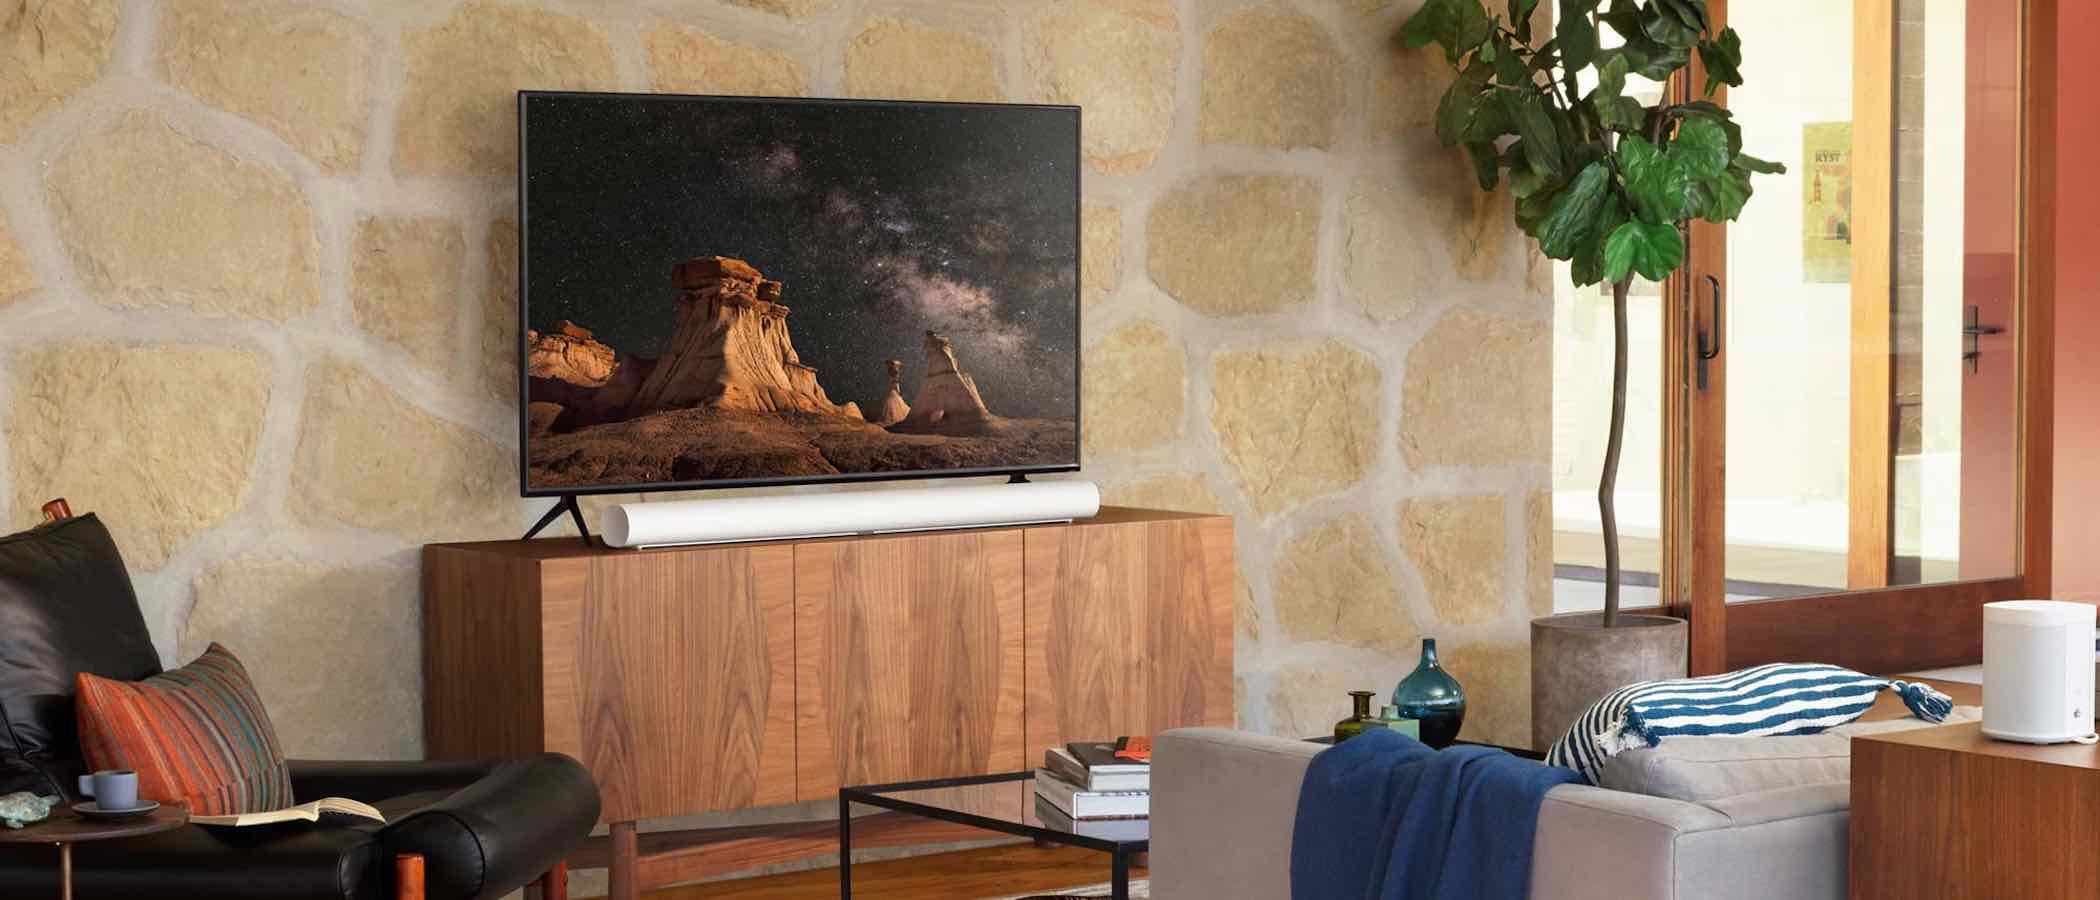 should you add a sound bar to your receiver?